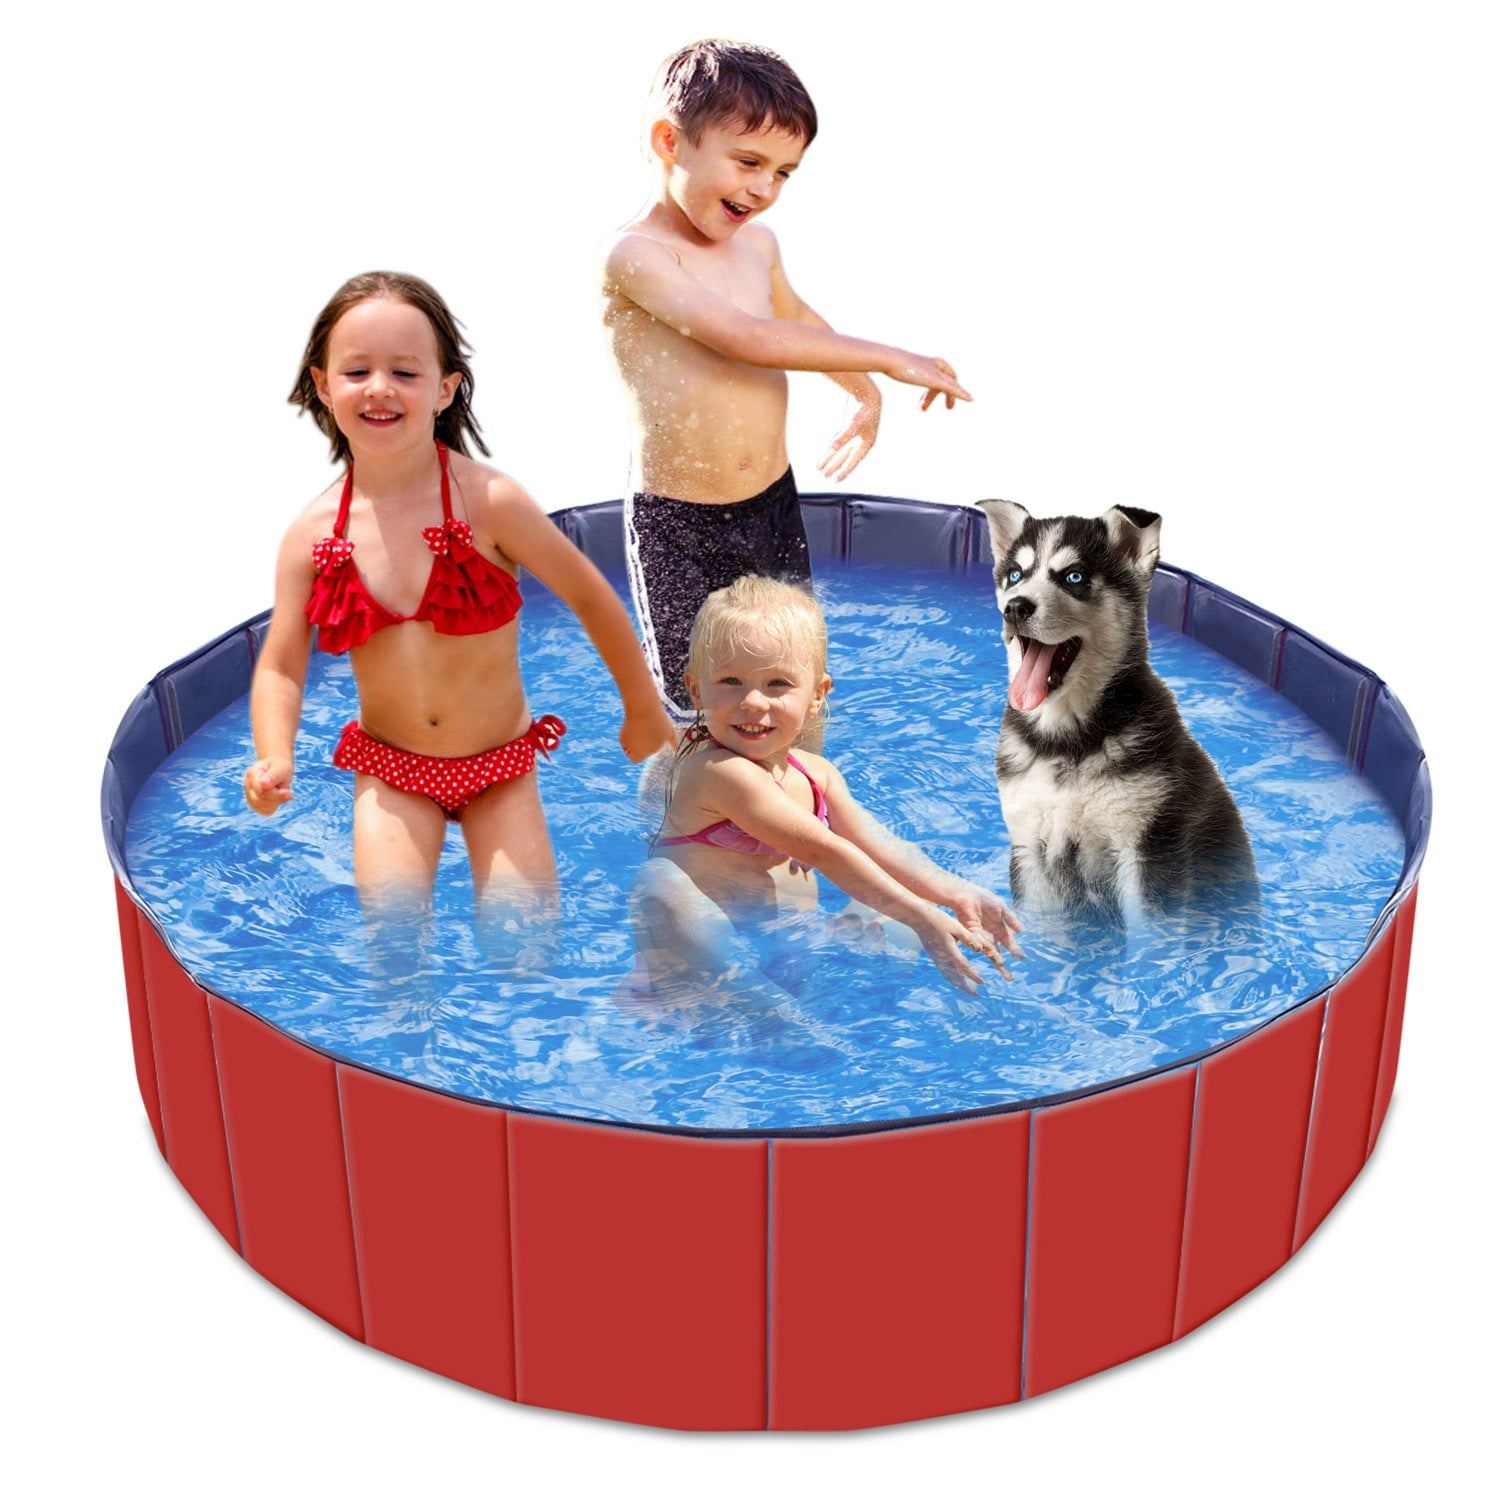 Kids Small Kiddie Pool Plastic Hard Ducks Portable Paw Pool for Dogs Toddler Cats Pet Babies Future Way 32 x 8 Inch Puppy Pool Heavy Duty PVC 